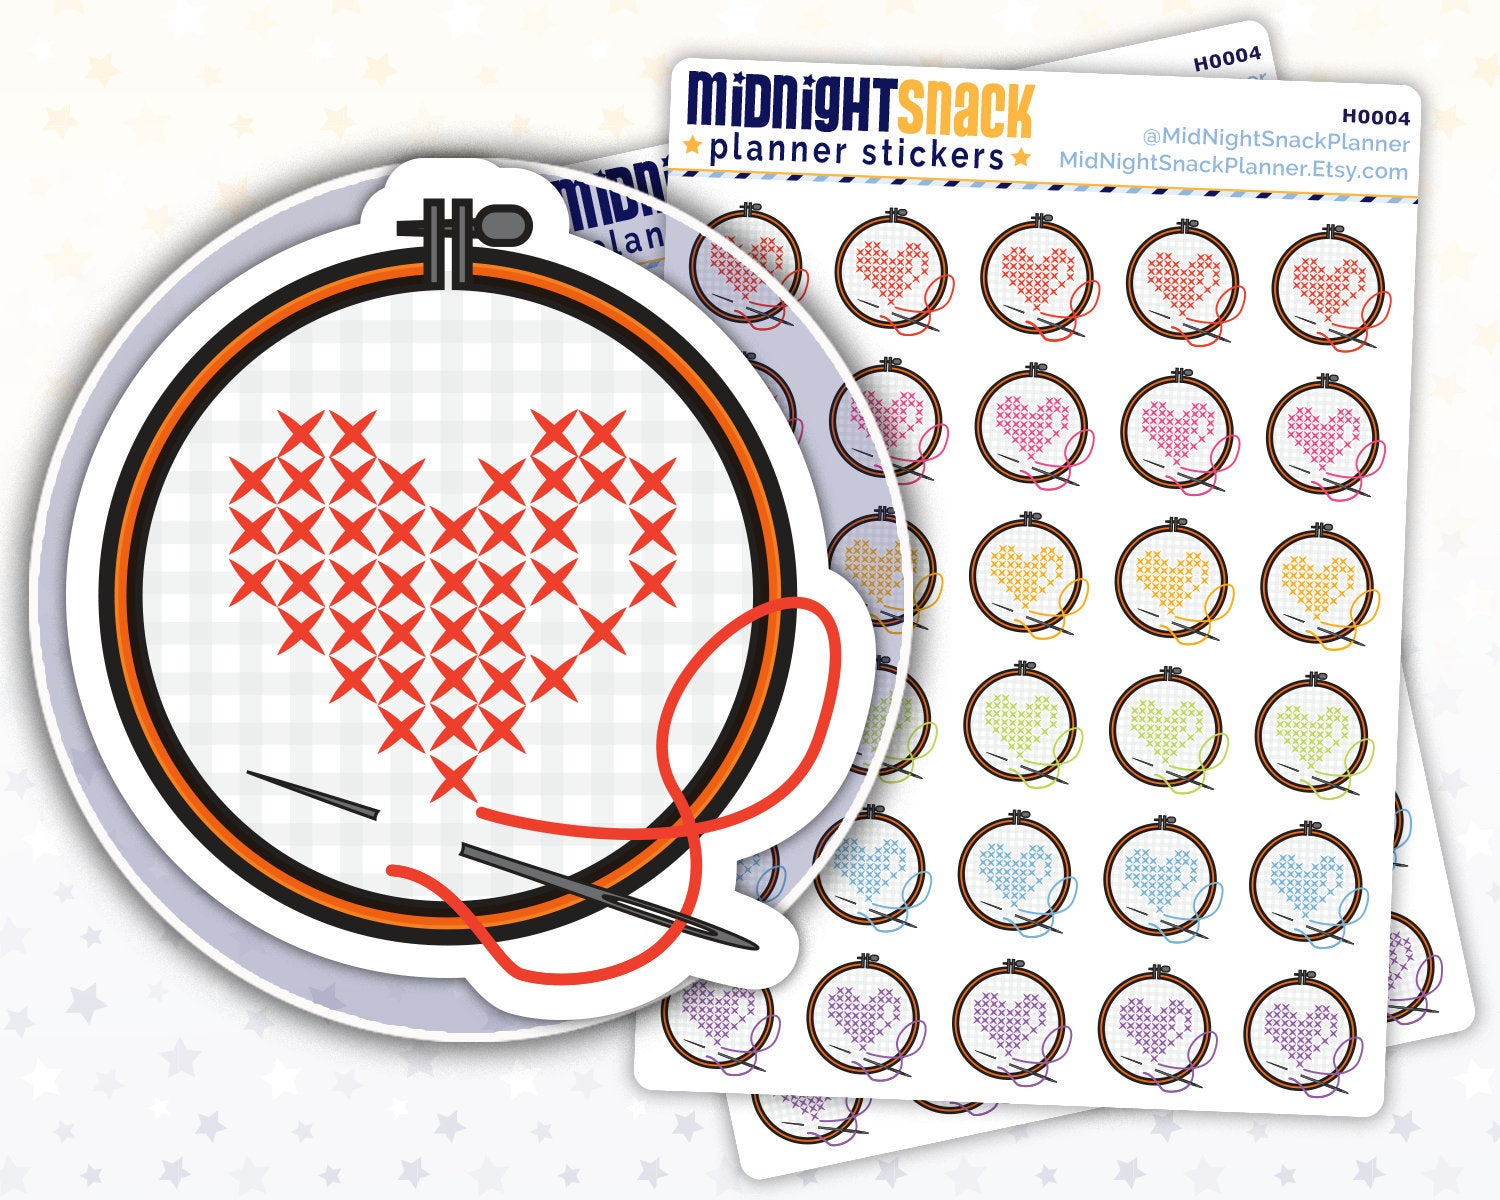 Cross Stitch Or Embroidery Hoop Icon: Craft Planner Stickers Midnight Snack Planner